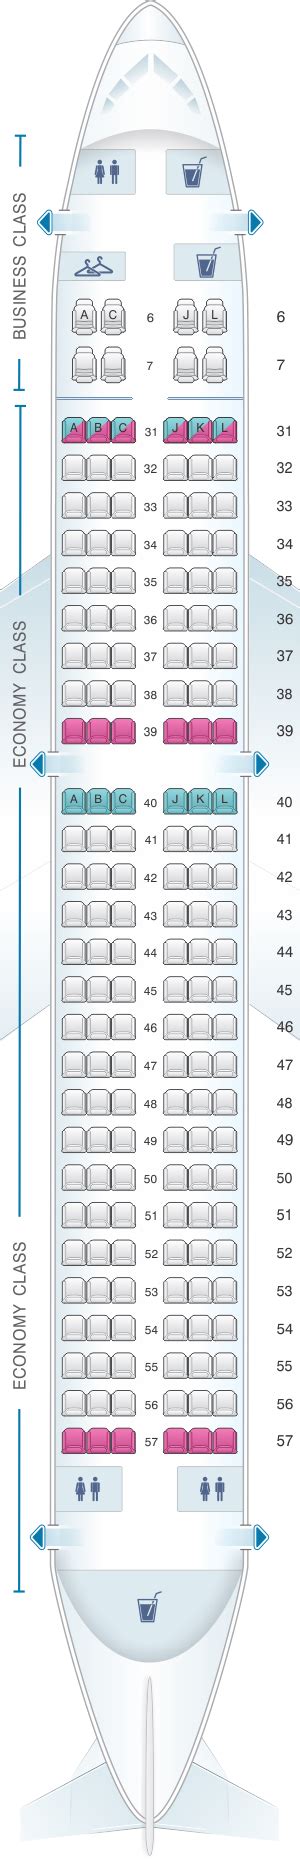 Seat Map China Eastern Airlines Boeing B737 800 Config1and Config2